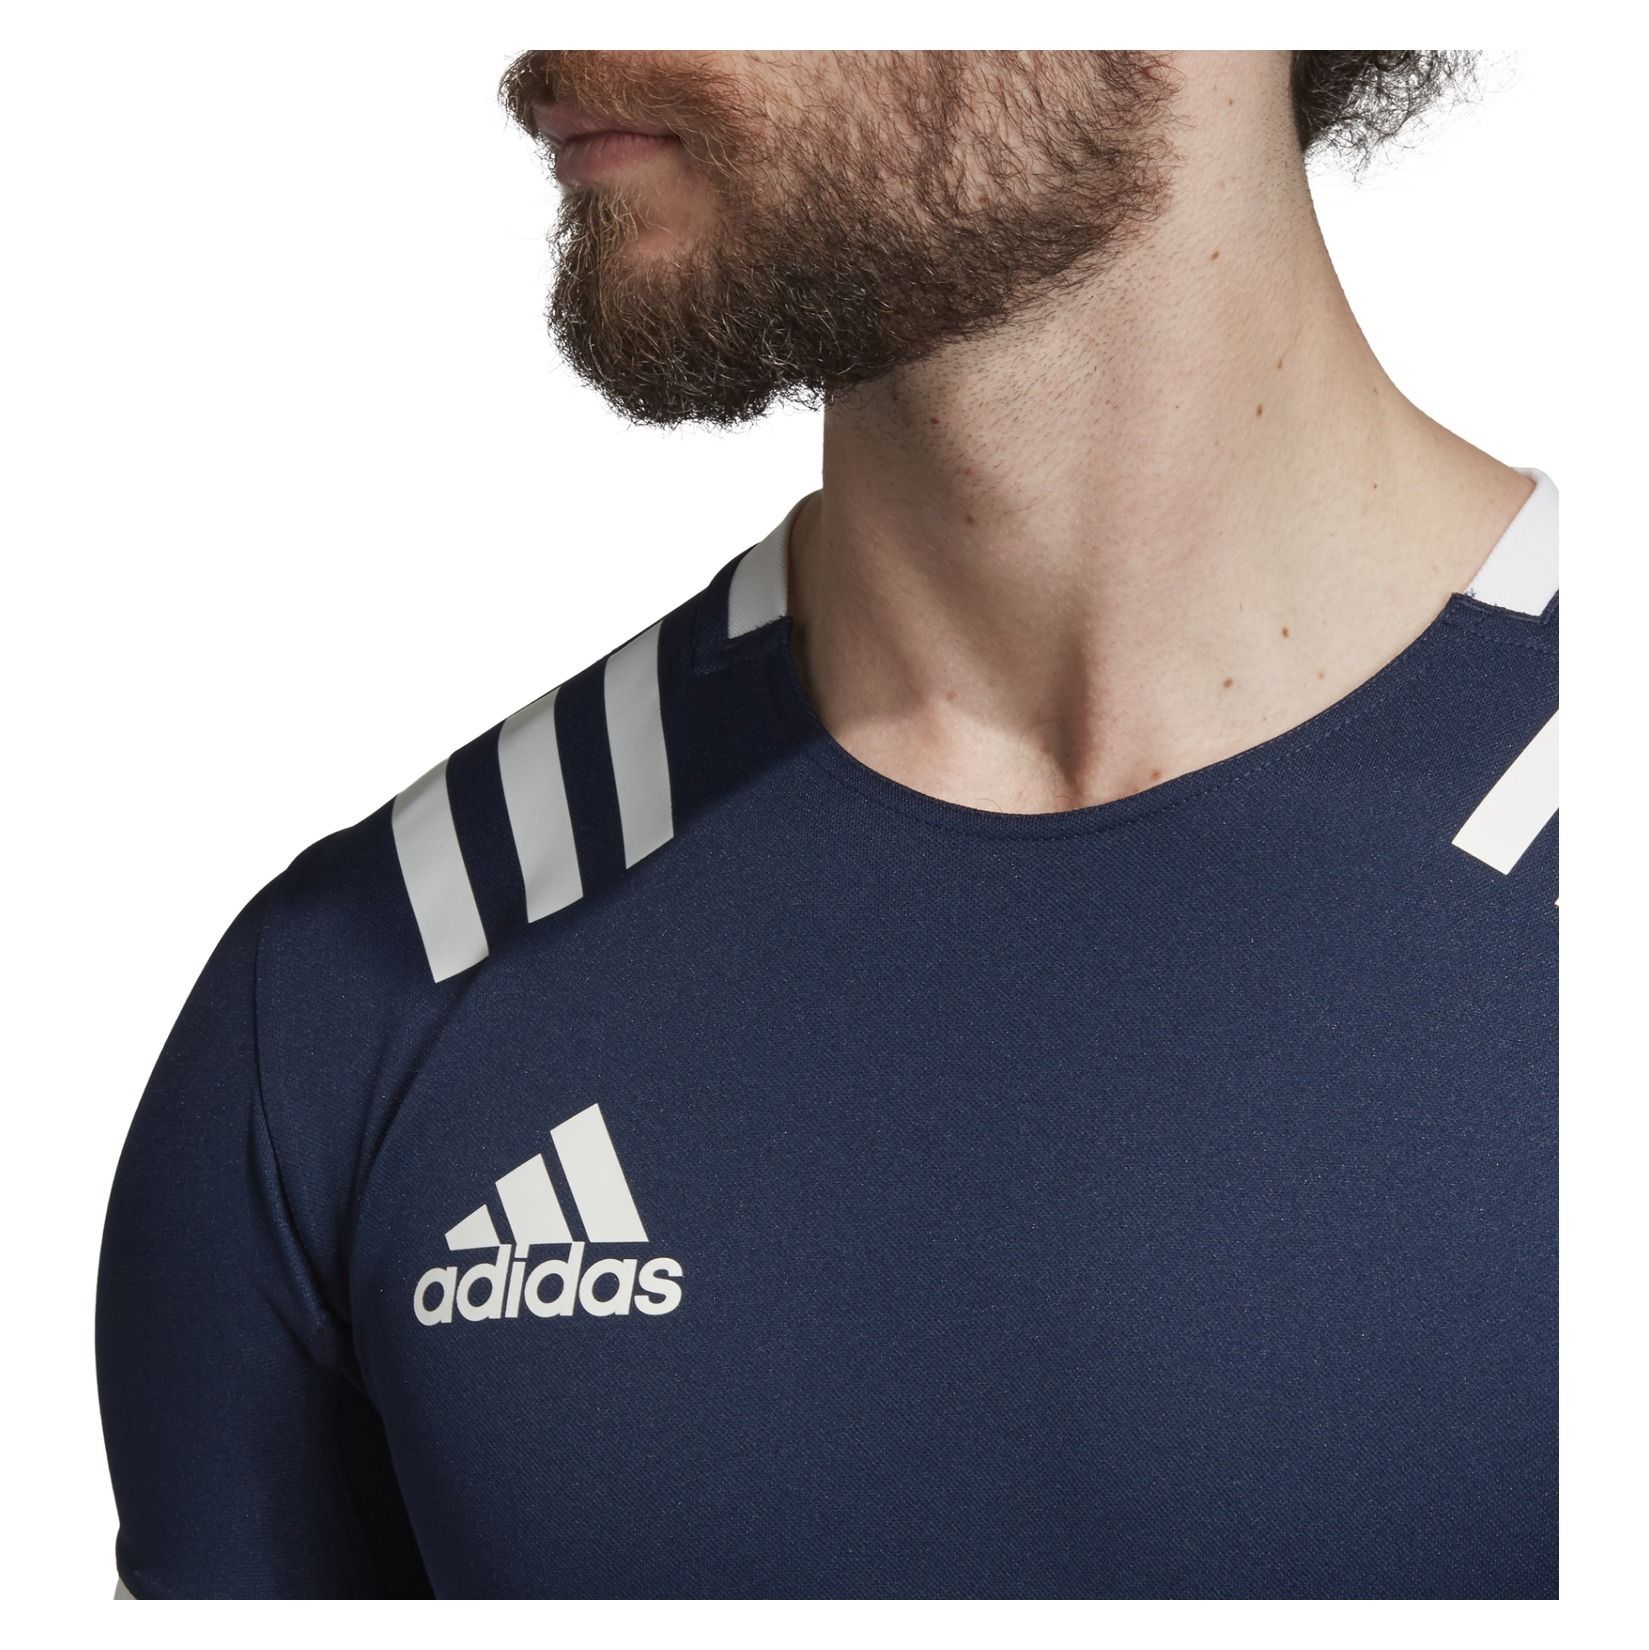 Adidas-LP 3 Stripes Fitted Rugby Jersey